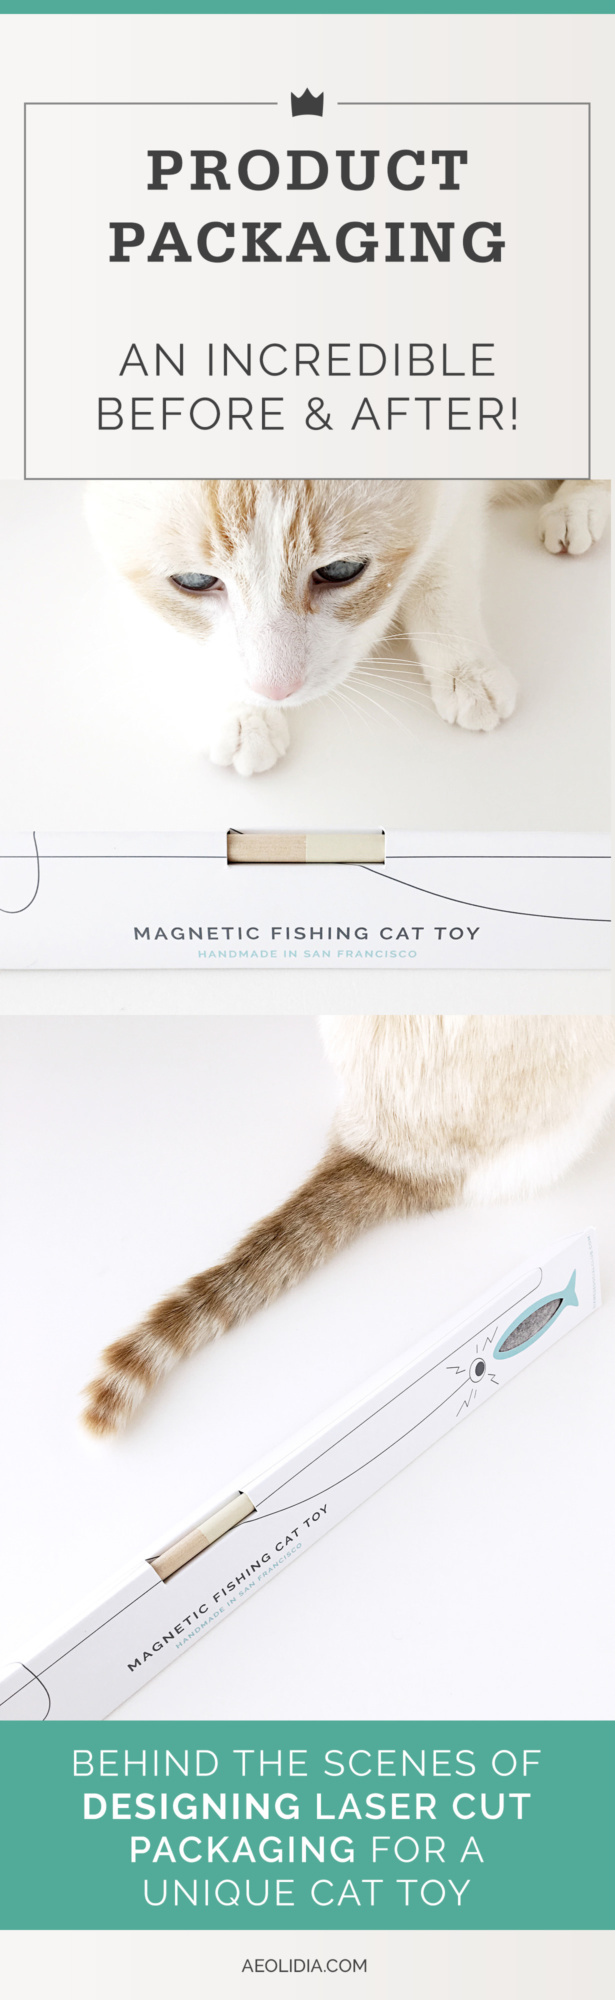 Product Package Design Before & After | Behind the Scenes of Designing Laser-Cut Packaging for a Unique Cat Toy